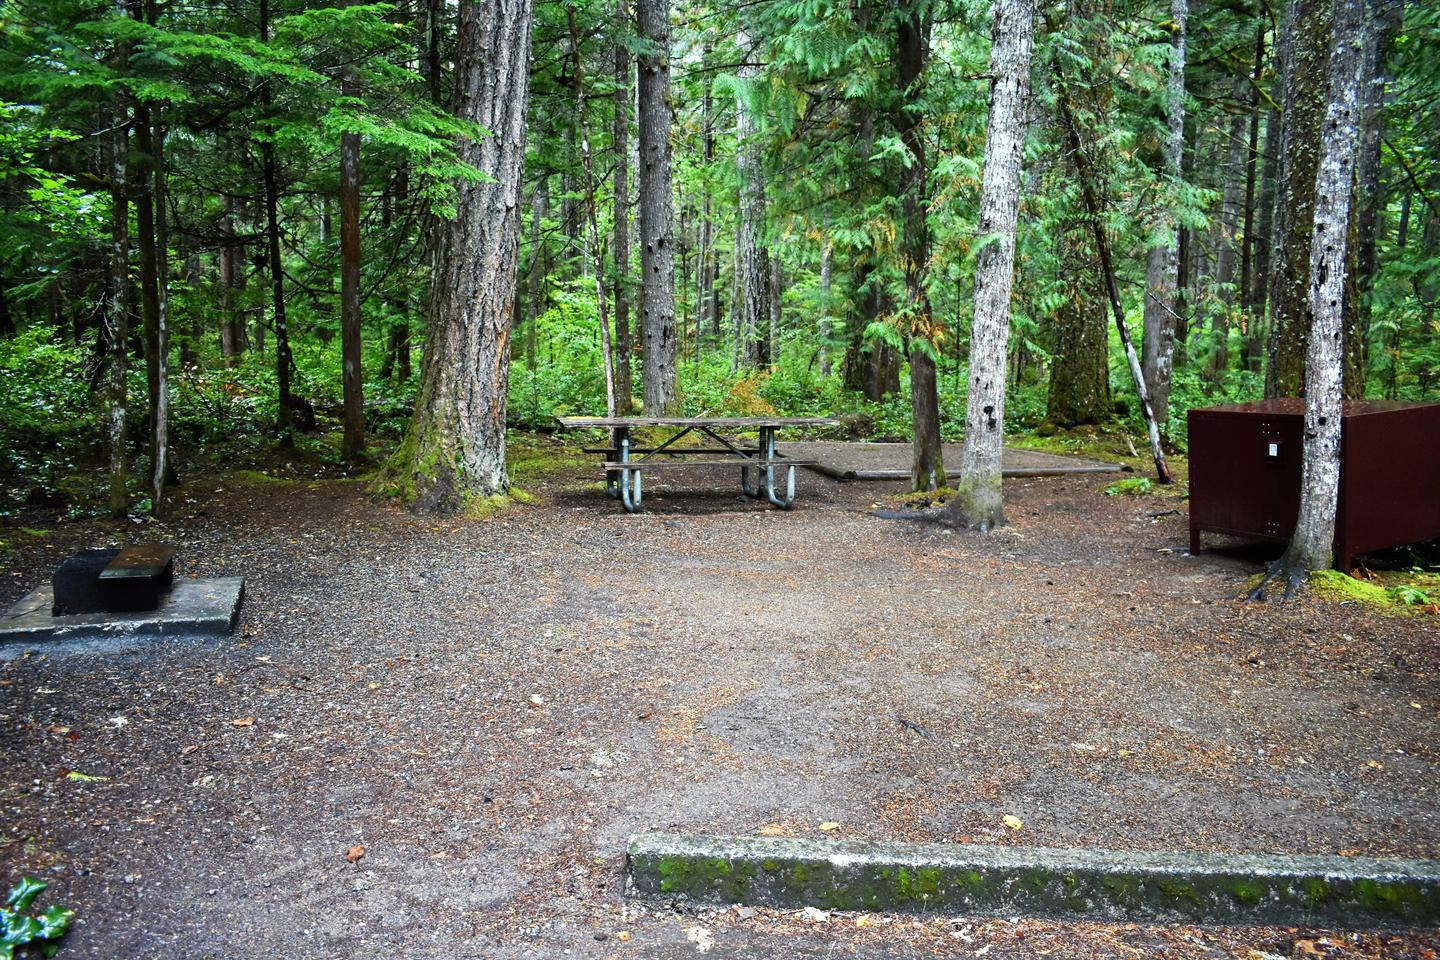 Fire ring, picnic table, tent pad, and food storage lockerView of campsite